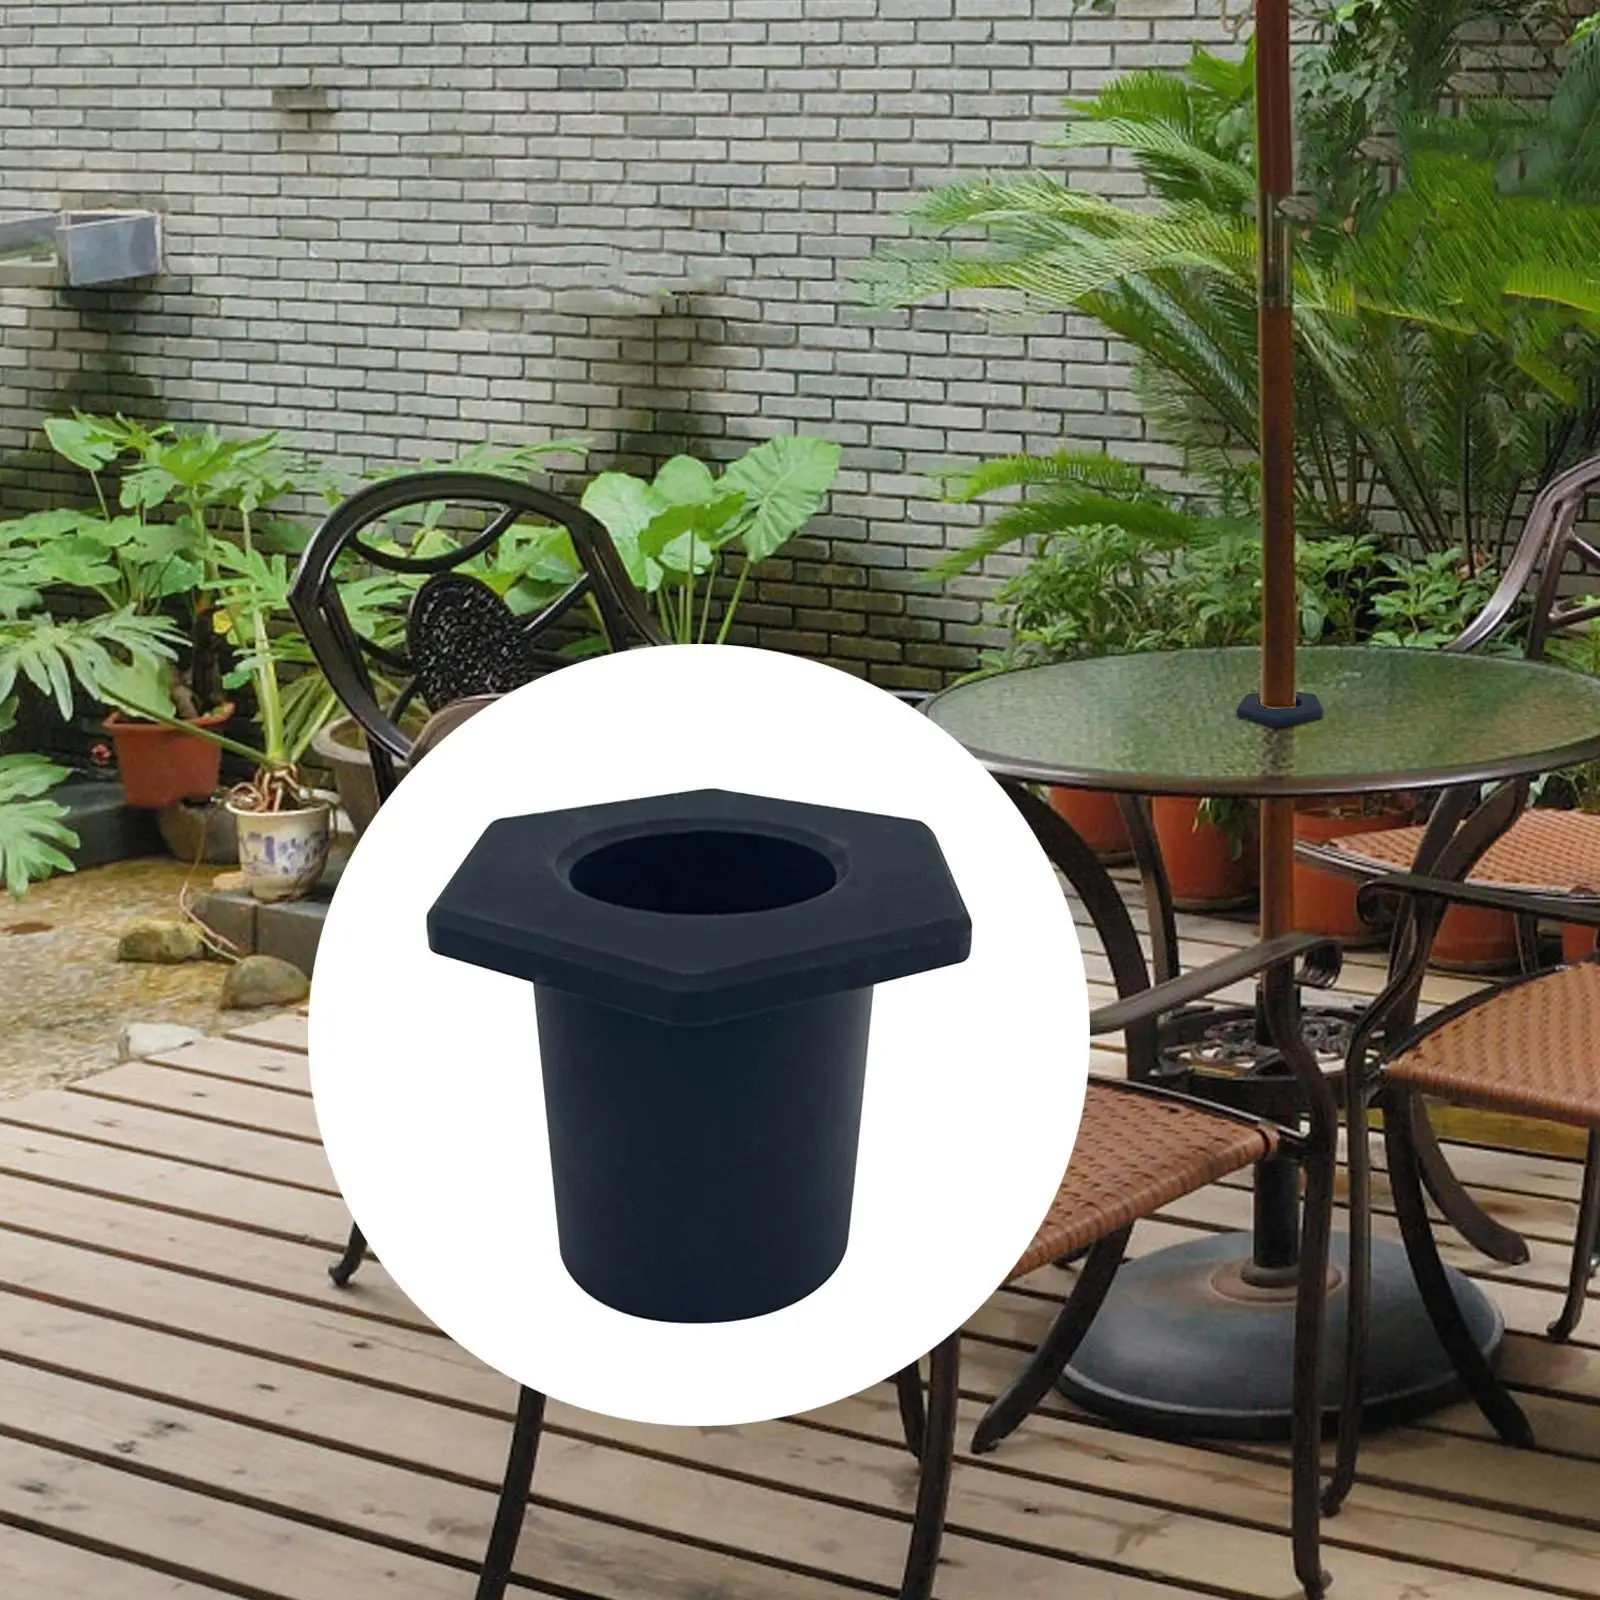 Umbrella Cone Wedge Plug Replace Multipurpose Fittings Simple Using Table Umbrella Hole Ring for Outdoor Terrace Parasol Camping